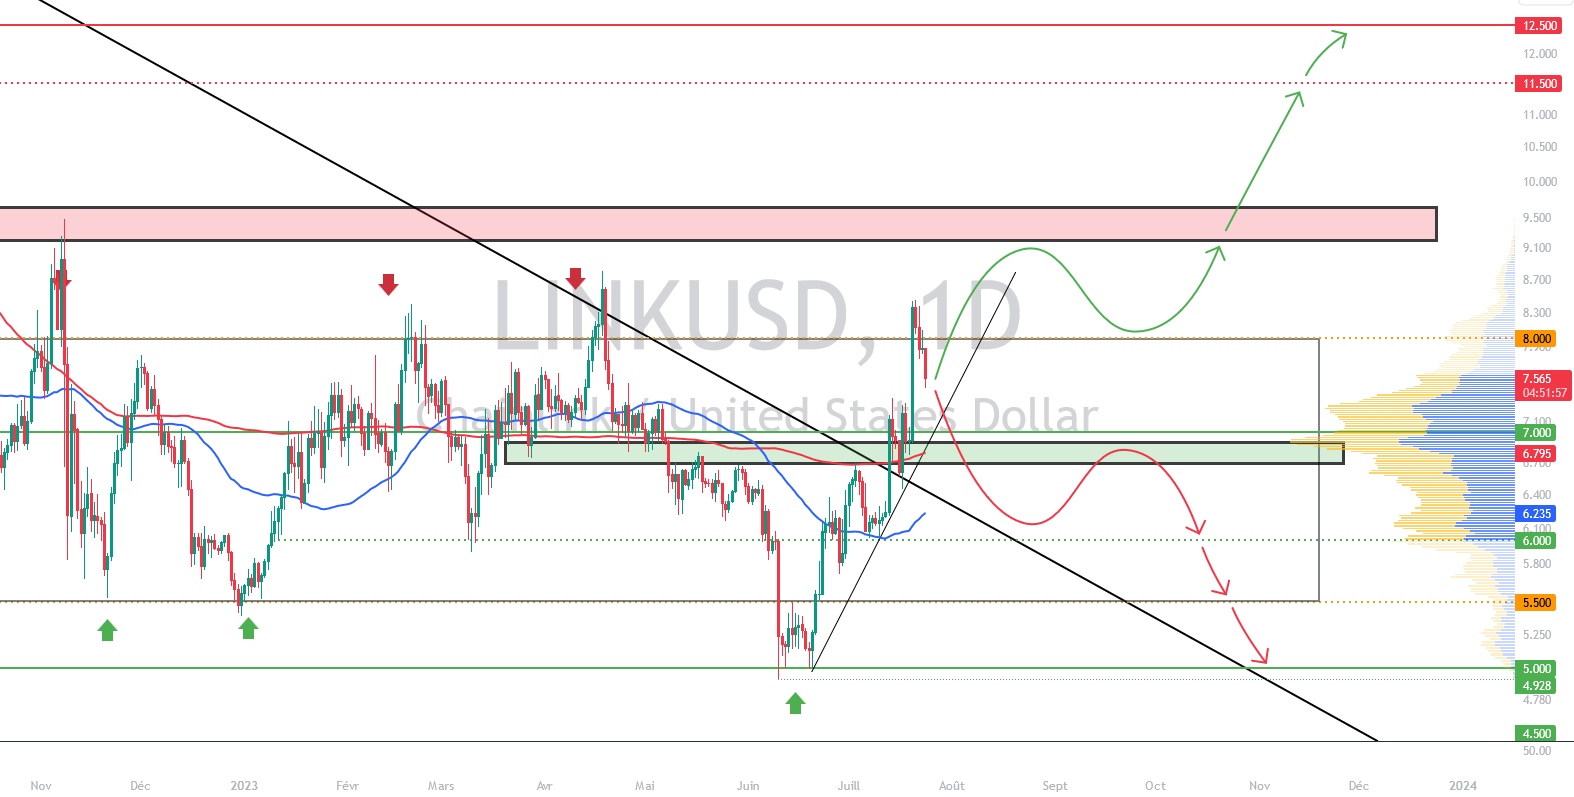 Daily LINK/USD chart